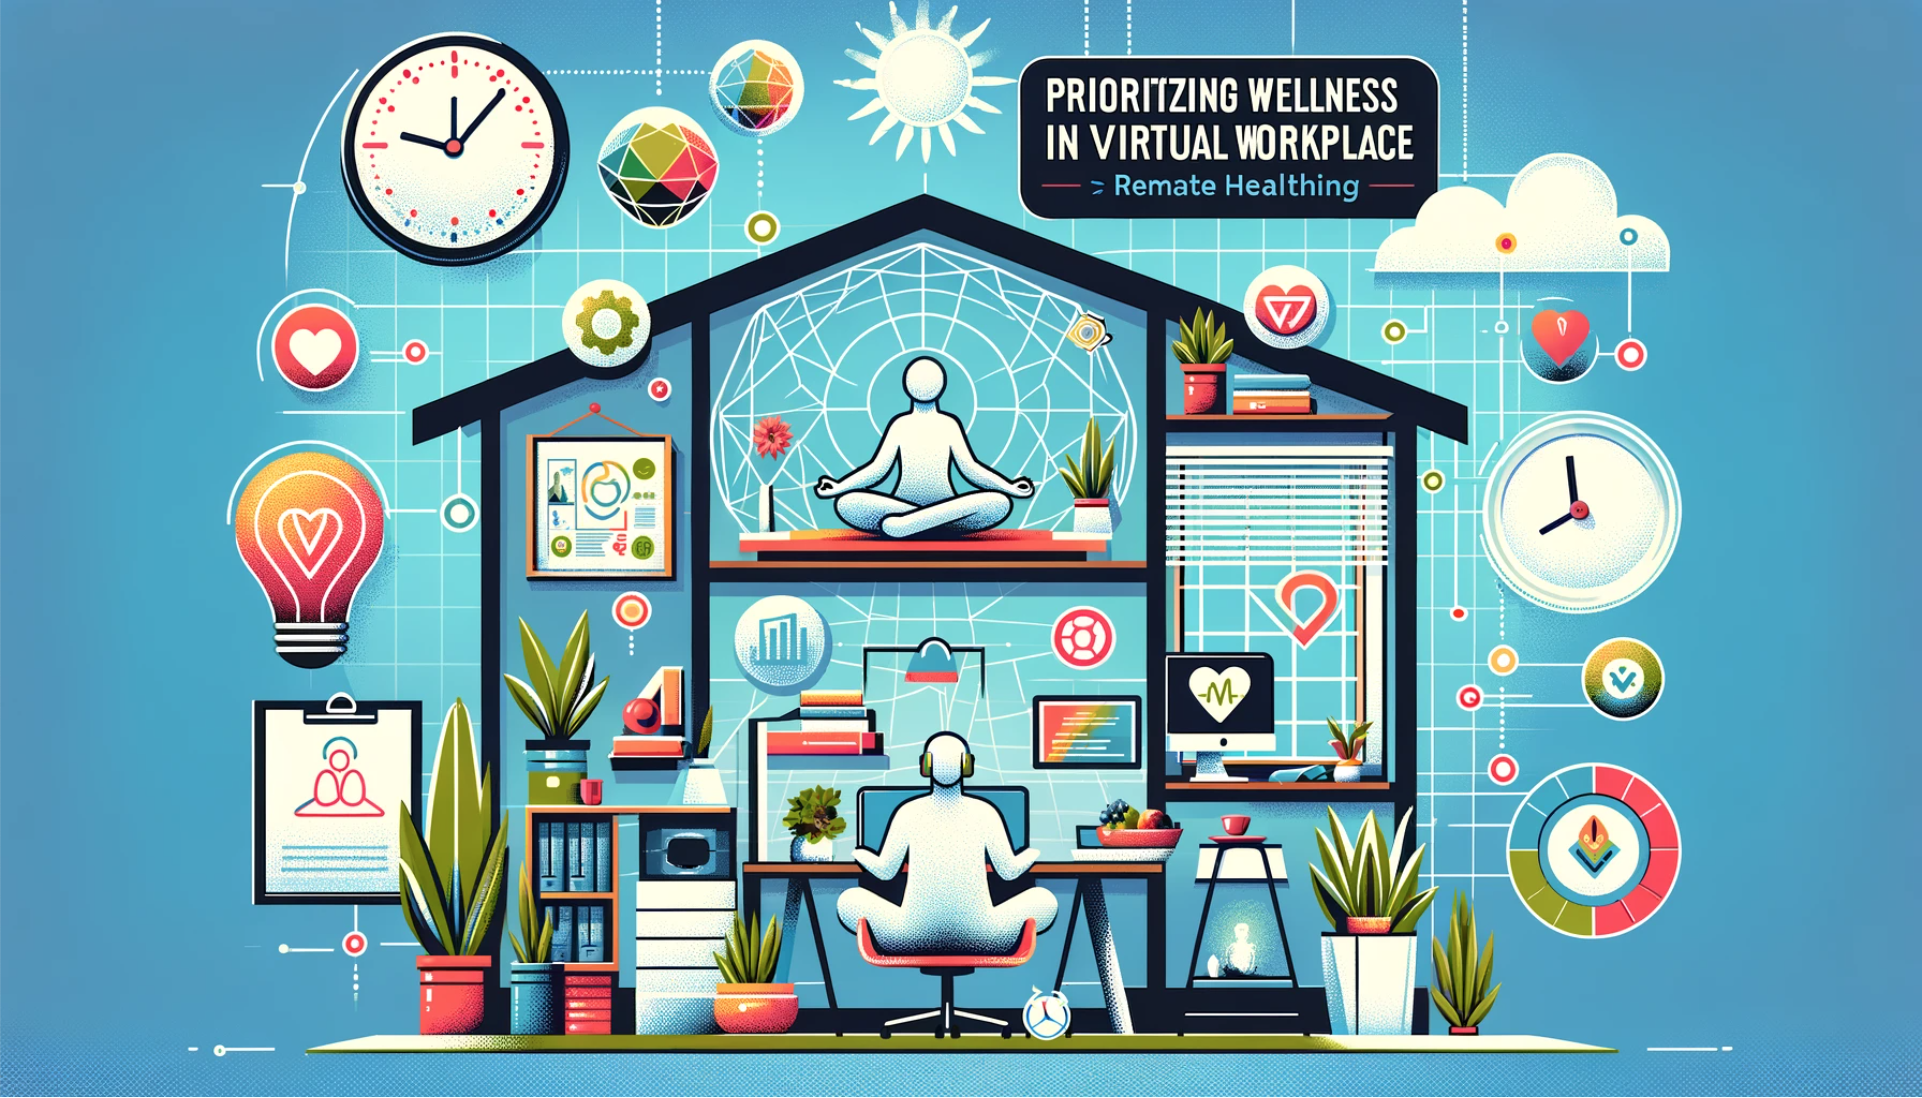 Prioritizing Wellness in the Virtual Workplace